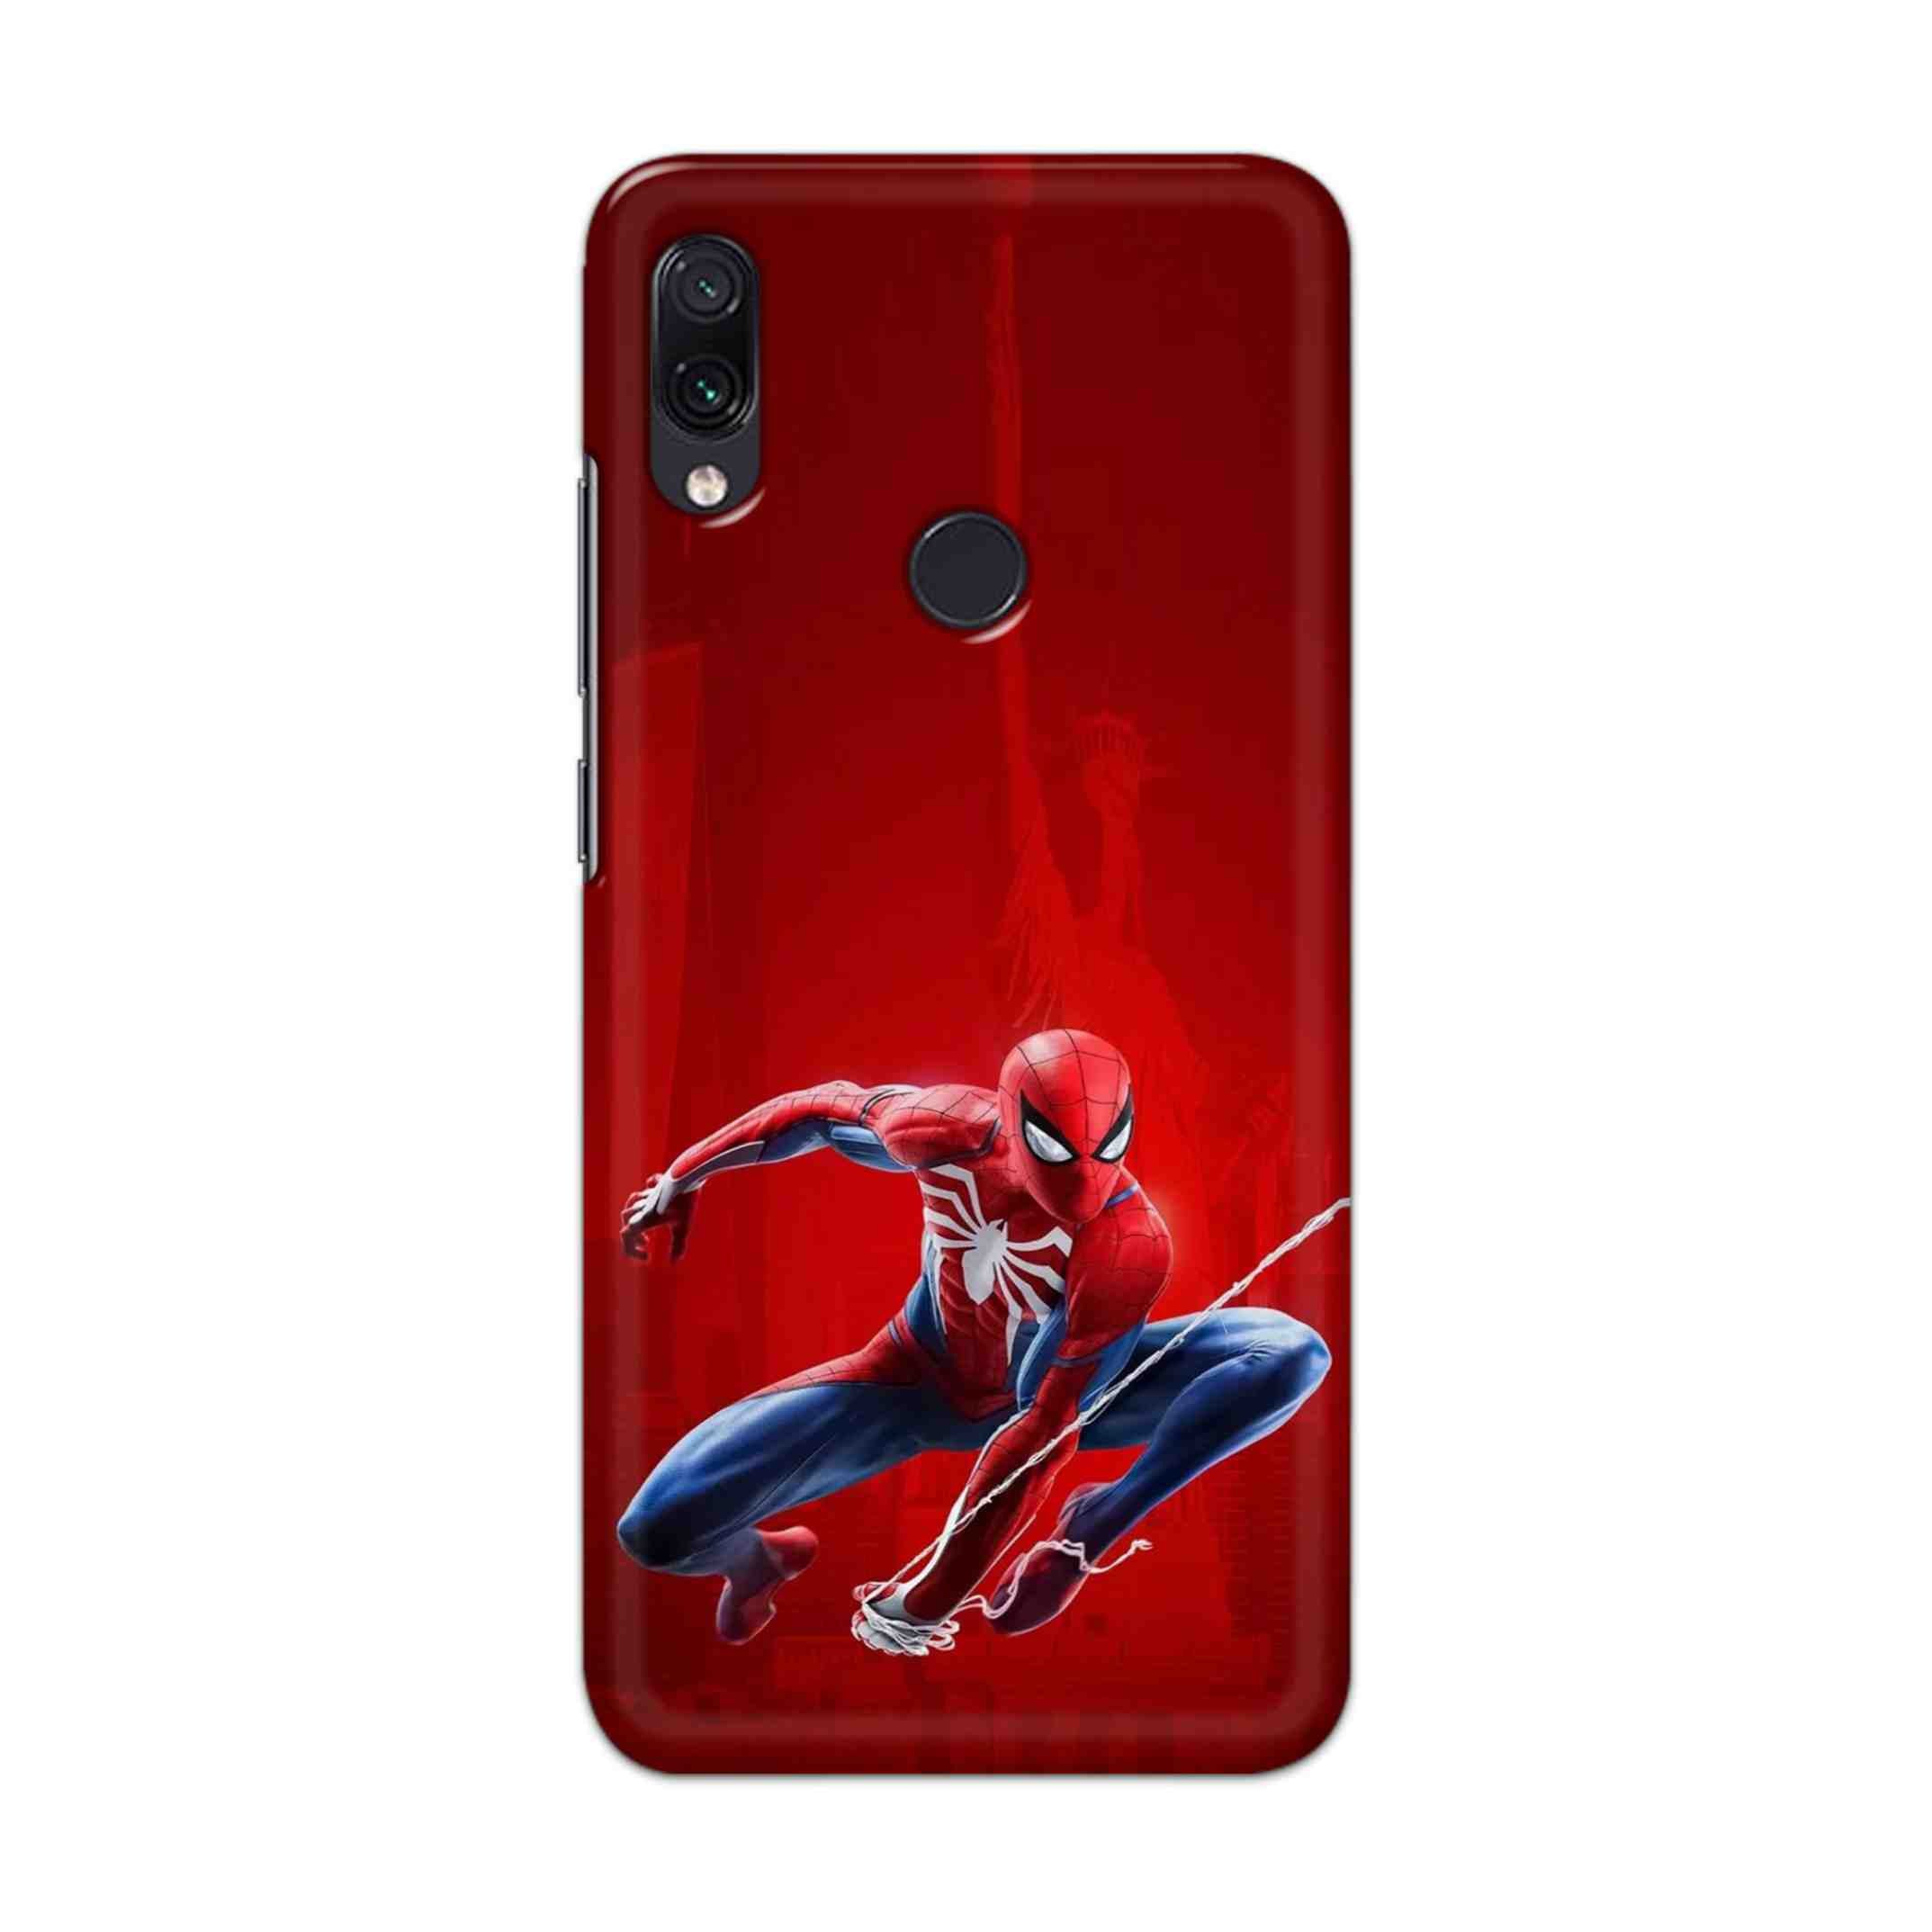 Buy Spiderman Hard Back Mobile Phone Case Cover For Redmi Note 7 / Note 7 Pro Online